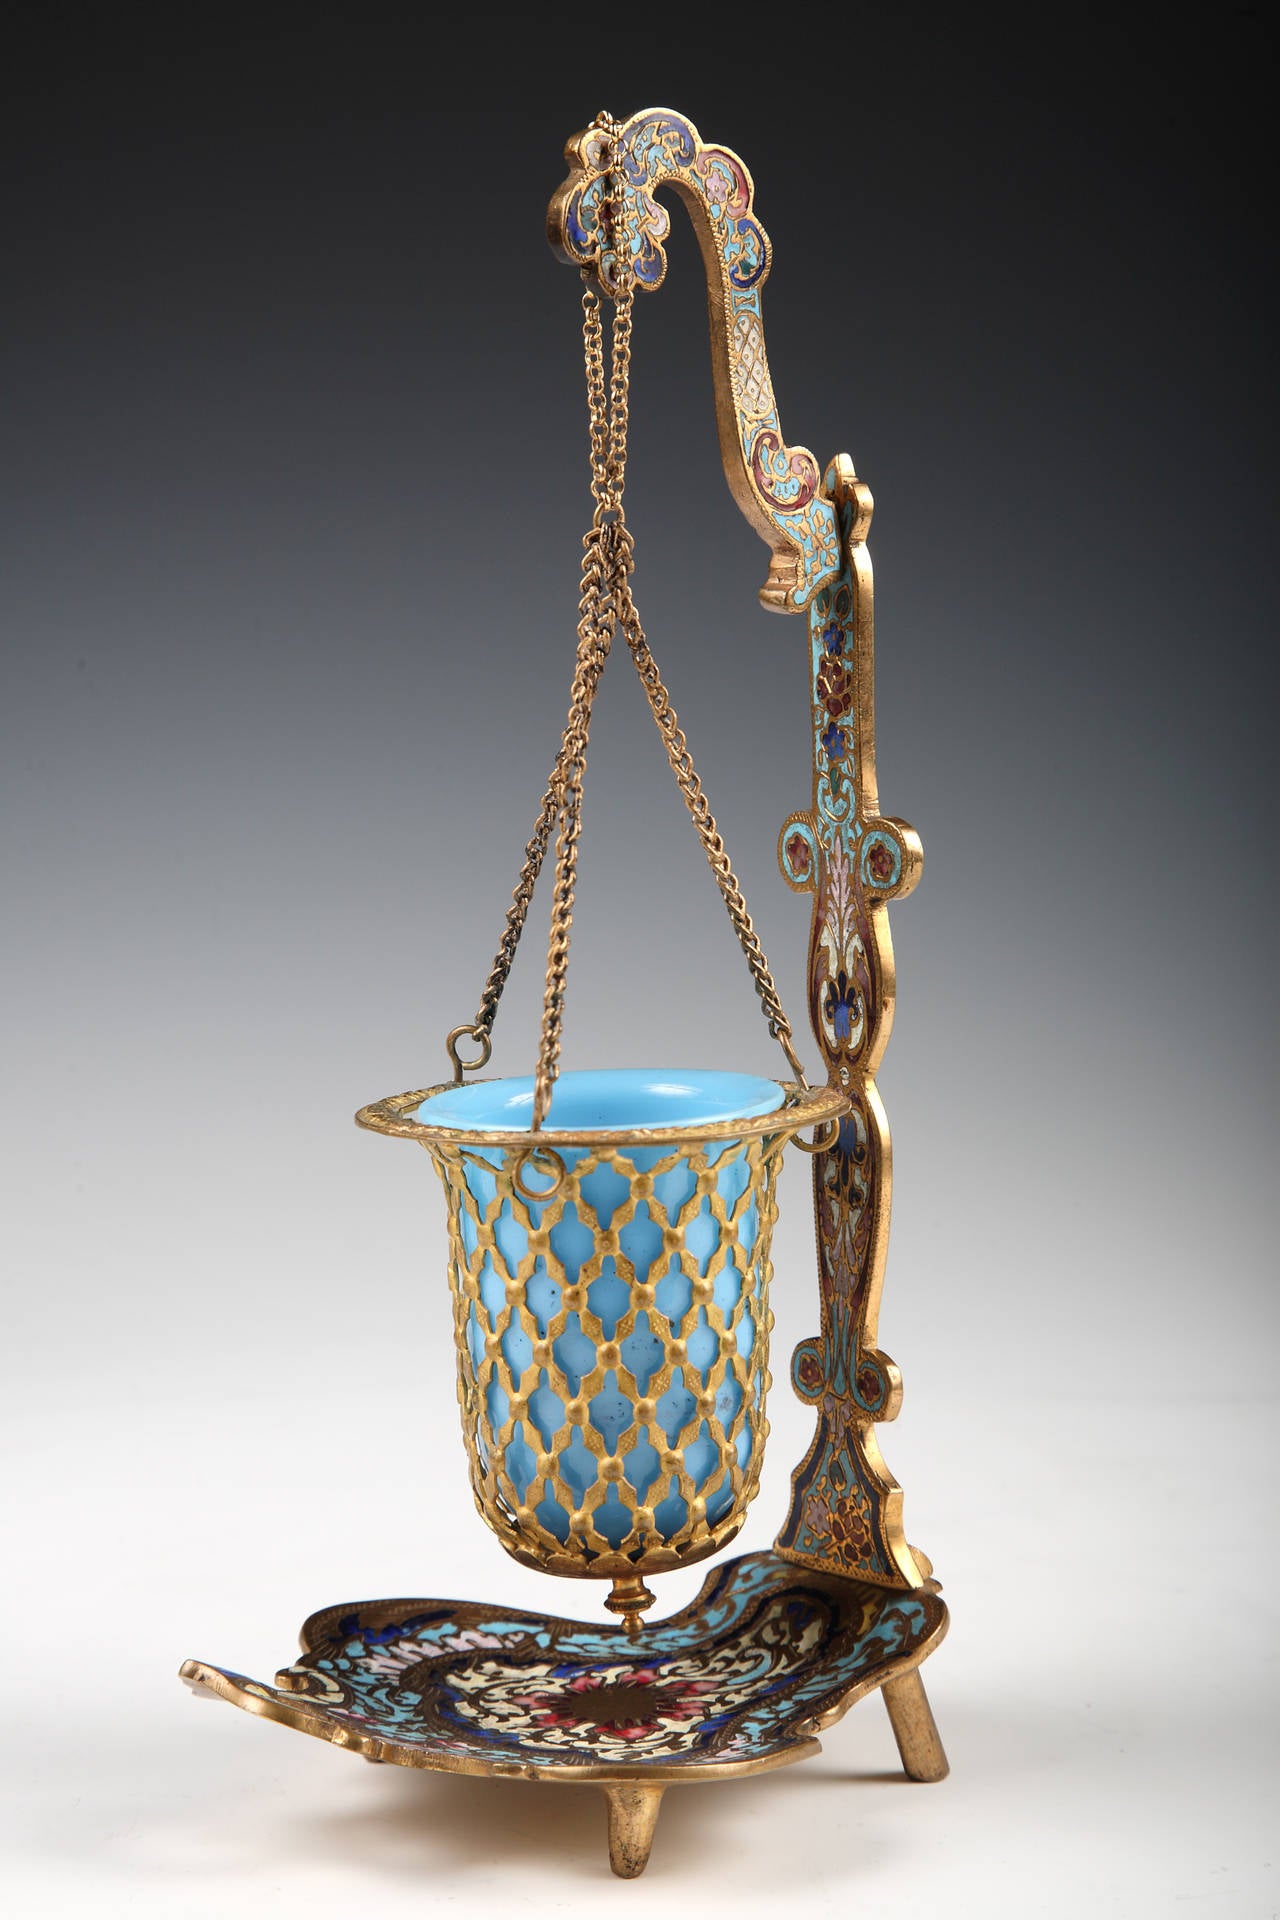 A. Giroux Designer and Art Objects Editor (active from 1799 to 1885).
Attributed to,
Charming Oriental Style Oil Lamp.
France, circa 1880.
Height. : 23 cm (9 in) ; Width. : 11 cm x 9 cm (4 ¼ x 3 ½ in).
Charming oriental style oil lamp; the